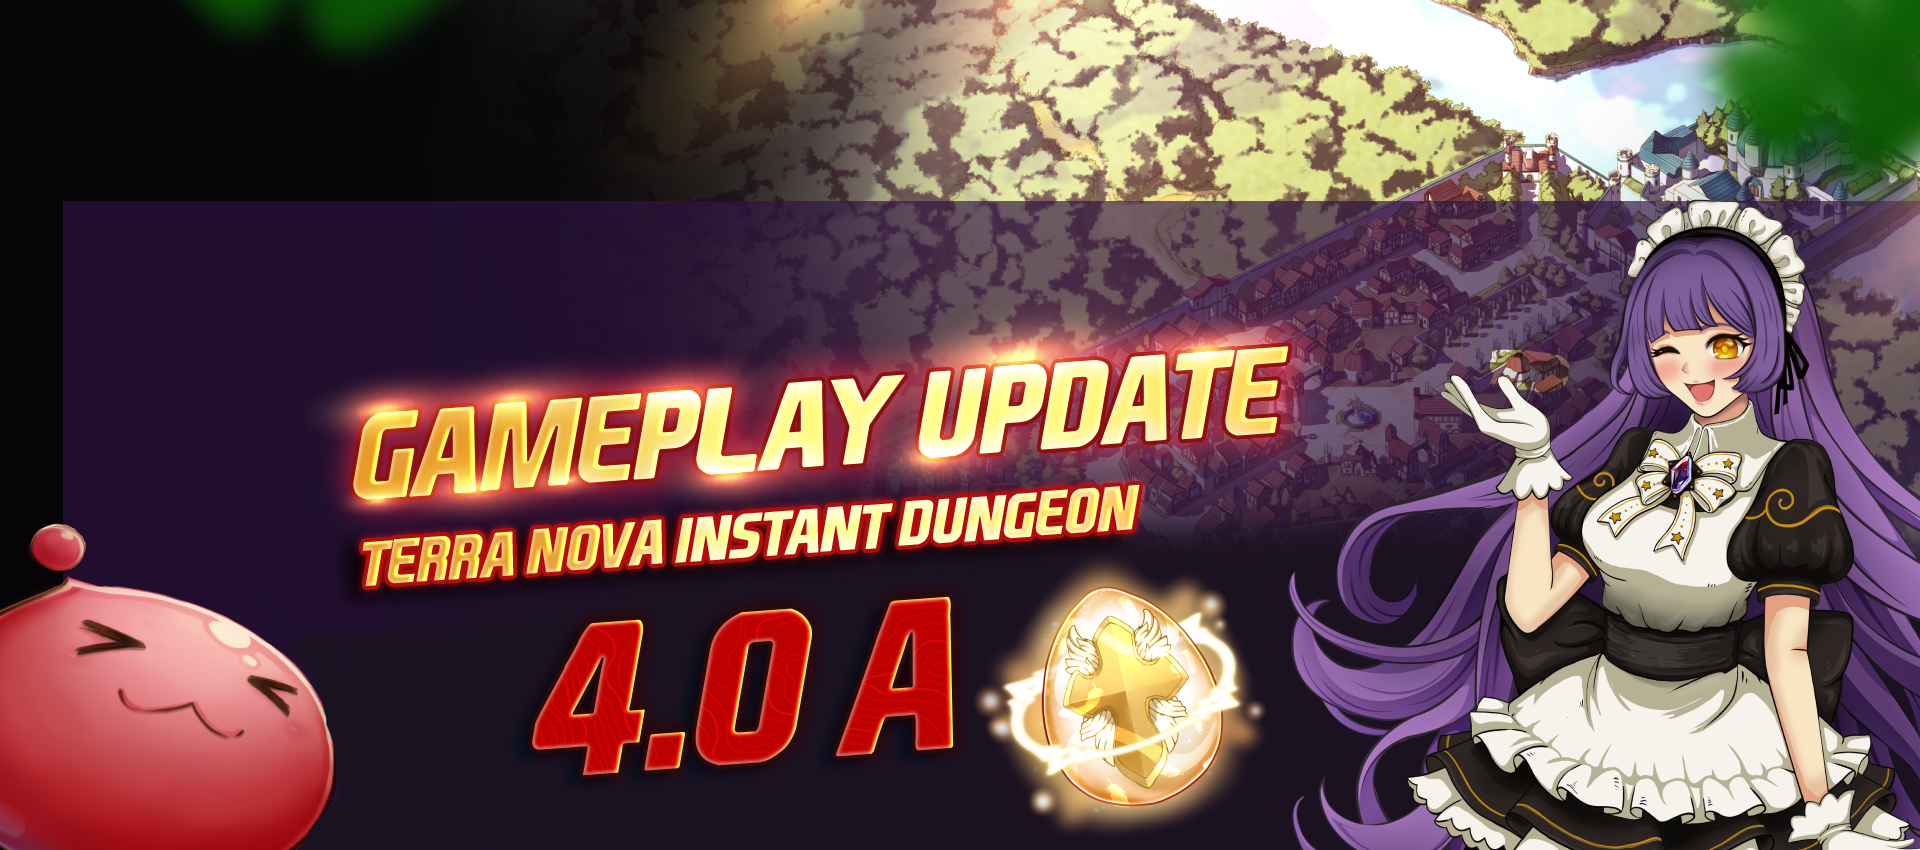 Gameplay Update EP 4.0a – Dungeon Run Event & Holy Sanctum scroll